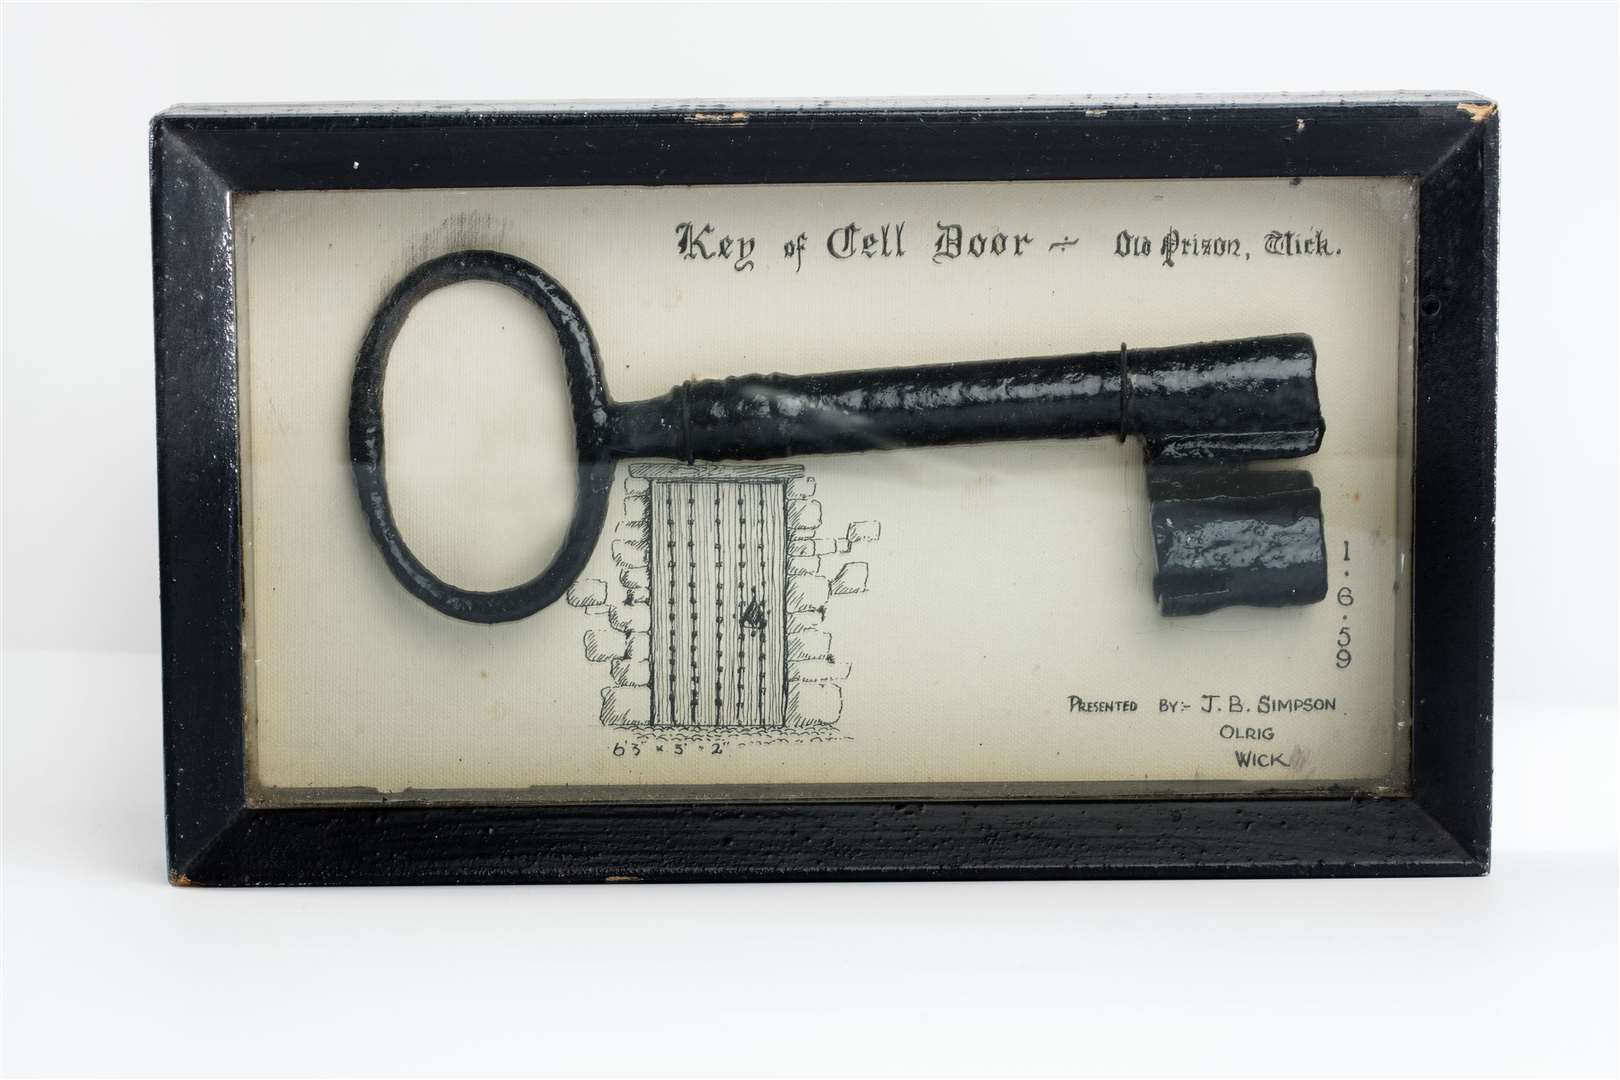 A key to one of the cells in Wick prison.